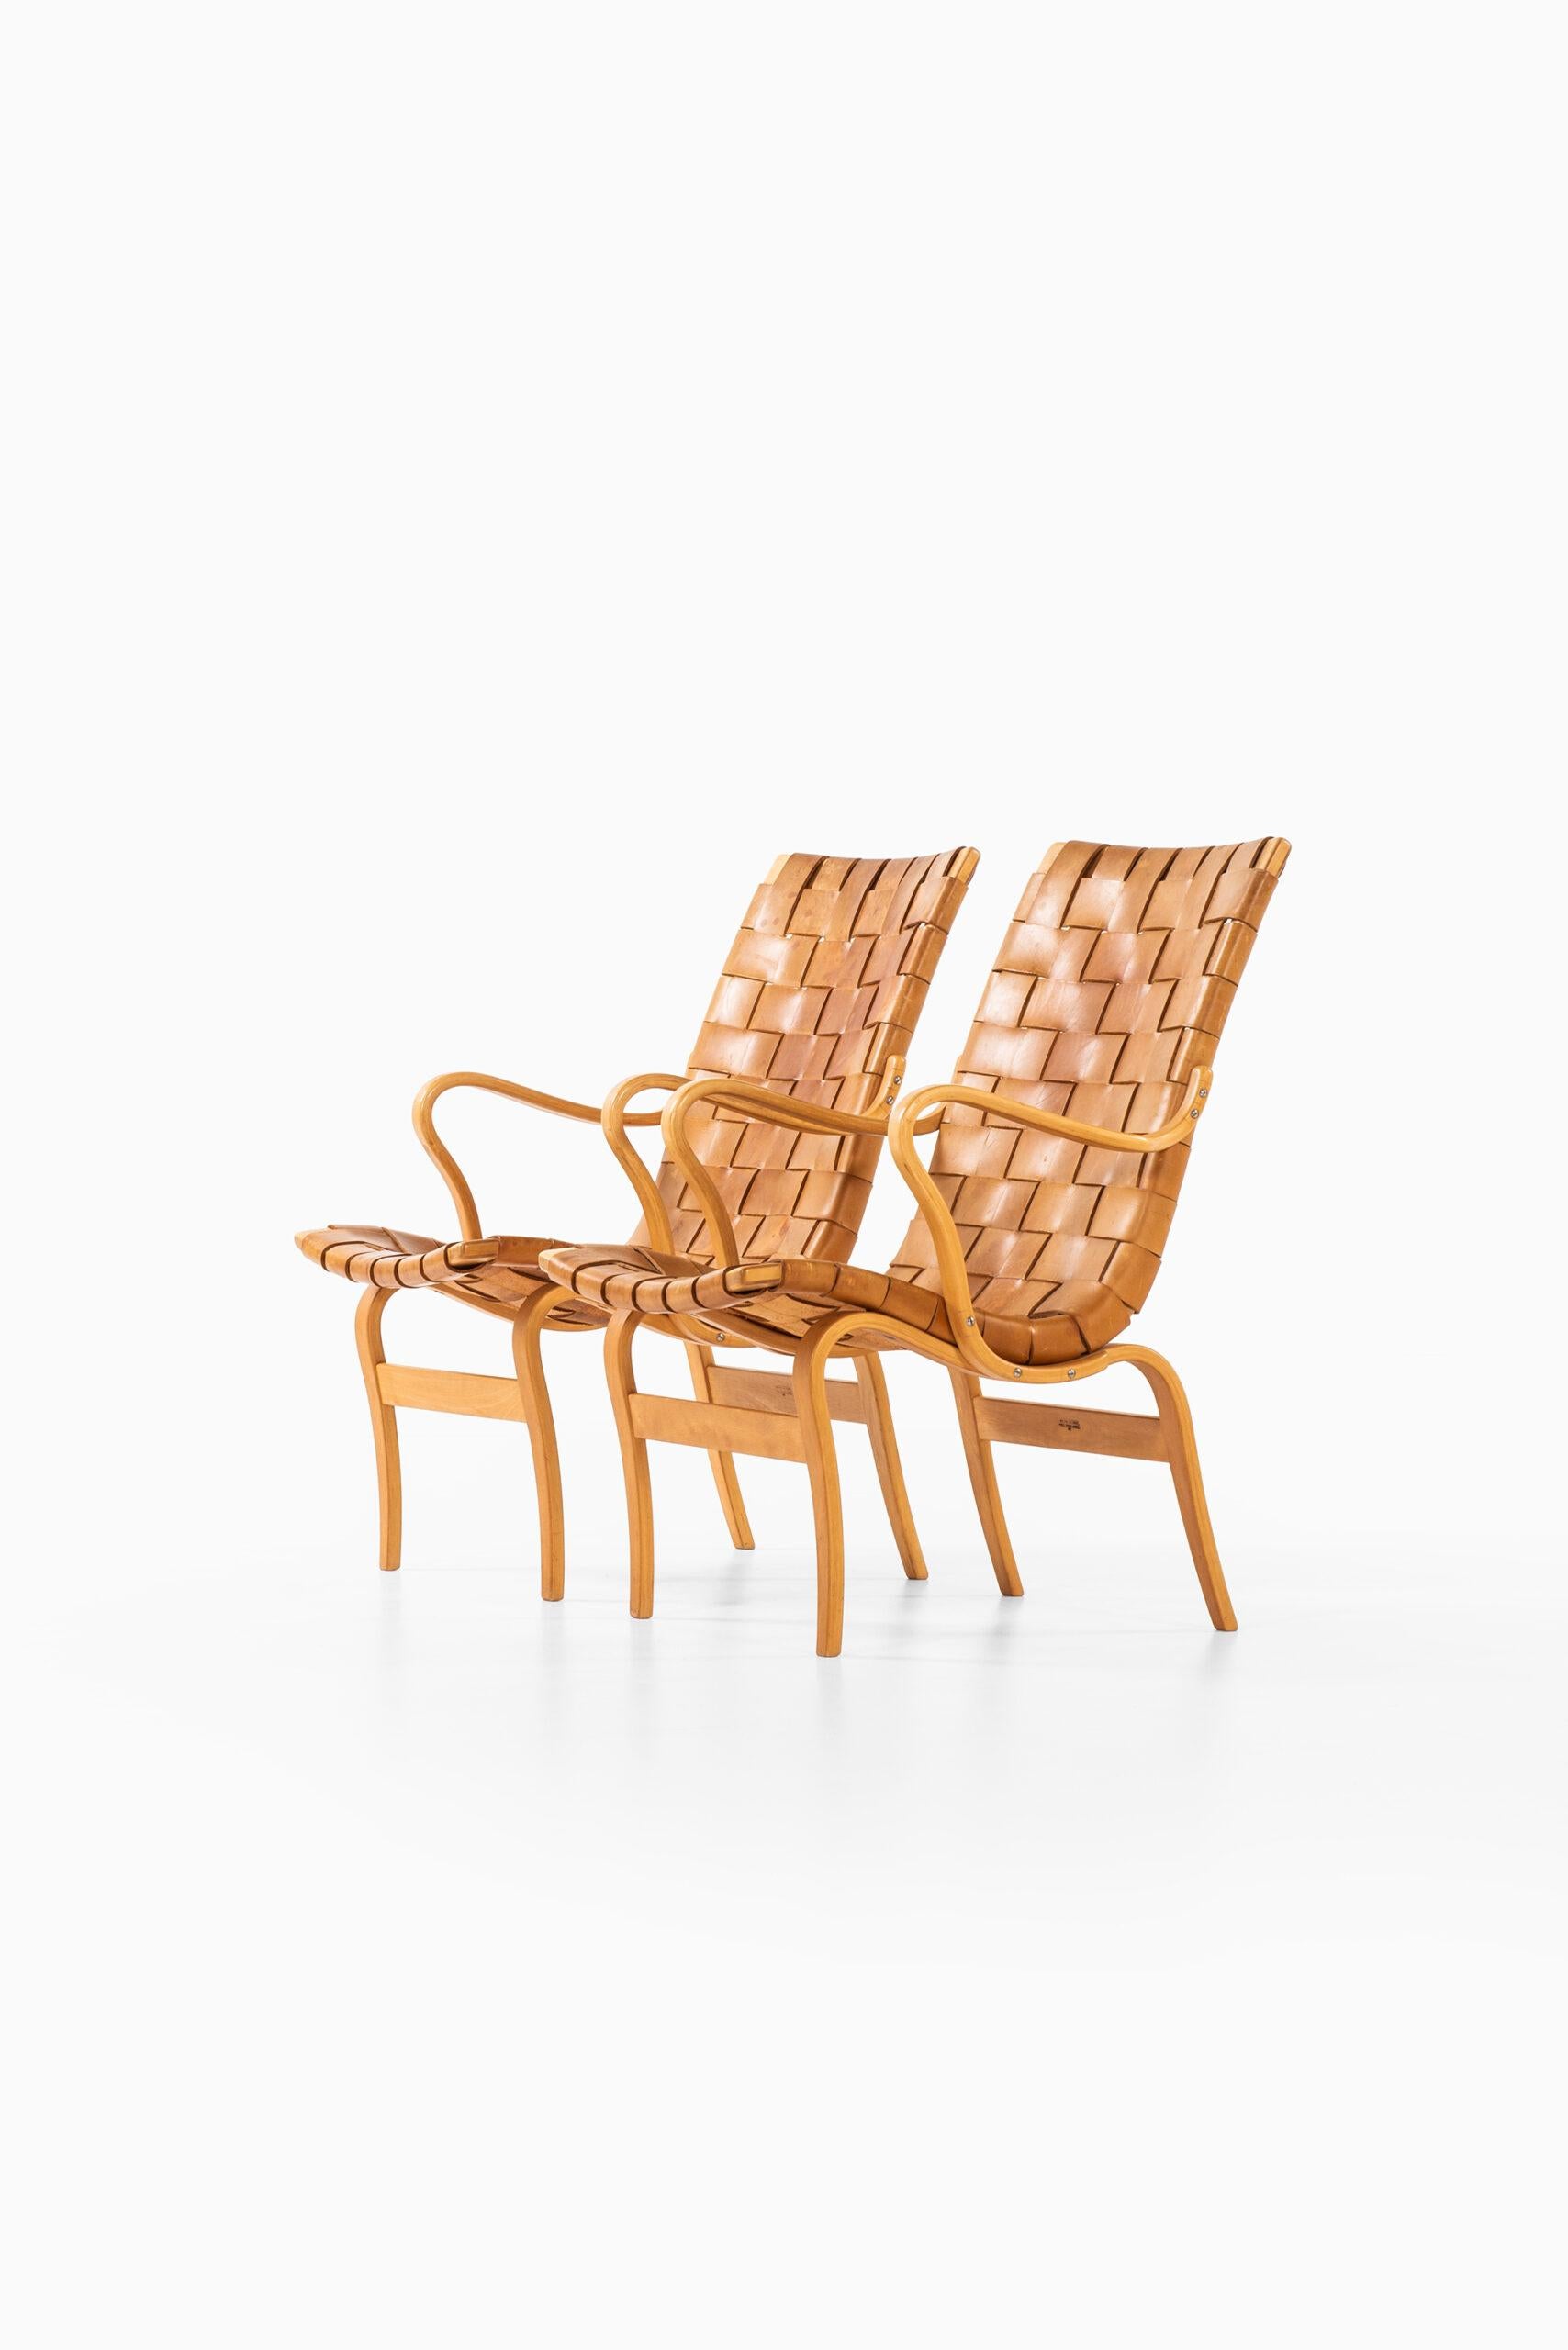 Rare pair of easy chairs model Eva designed by Bruno Mathsson. Produced by Karl Mathsson in Värnamo, Sweden.